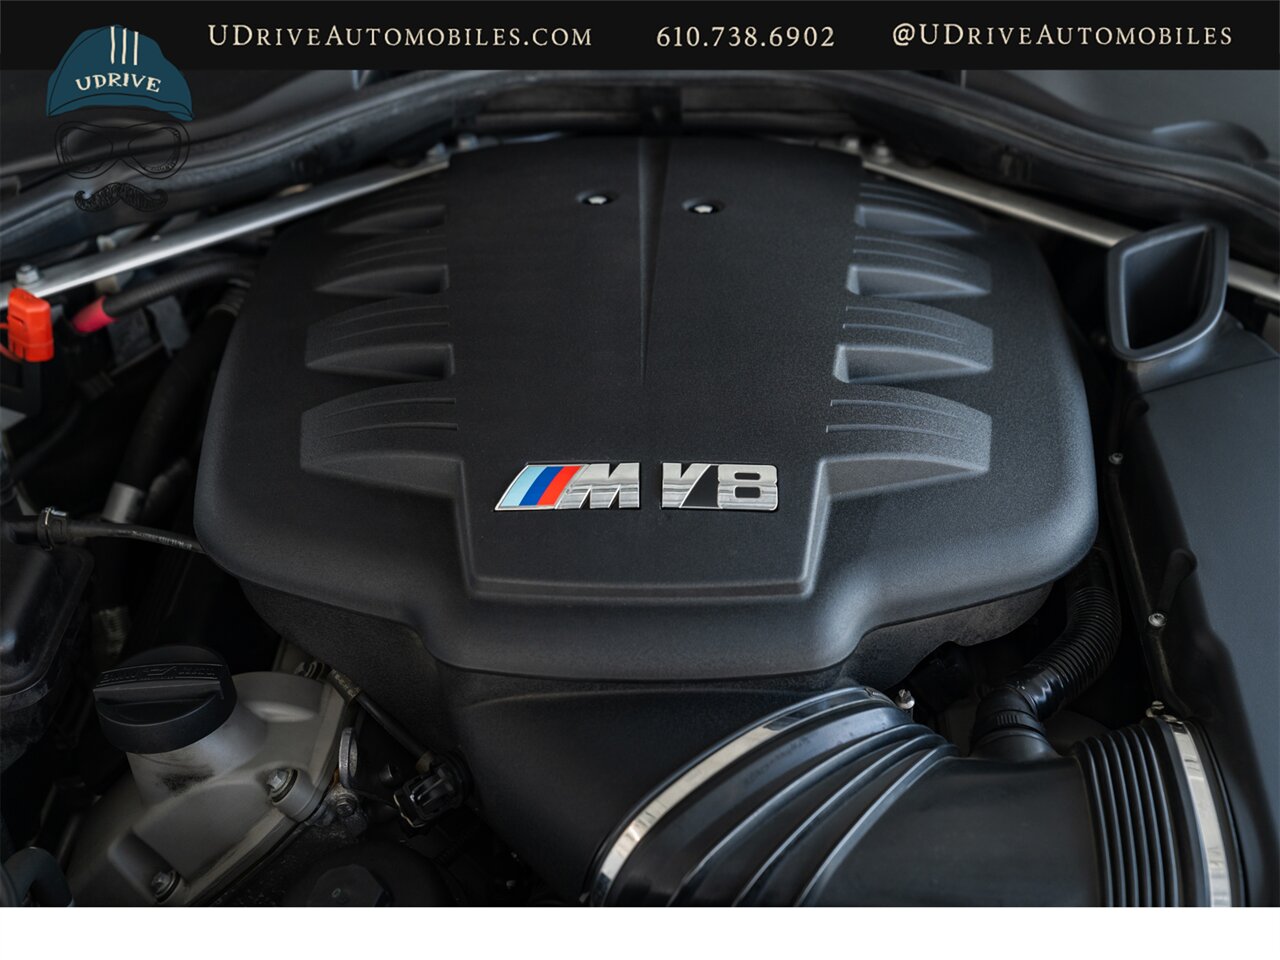 2011 BMW M3  No Nav Carbon Roof Comf Acc 19in Whls 11k Miles - Photo 52 - West Chester, PA 19382